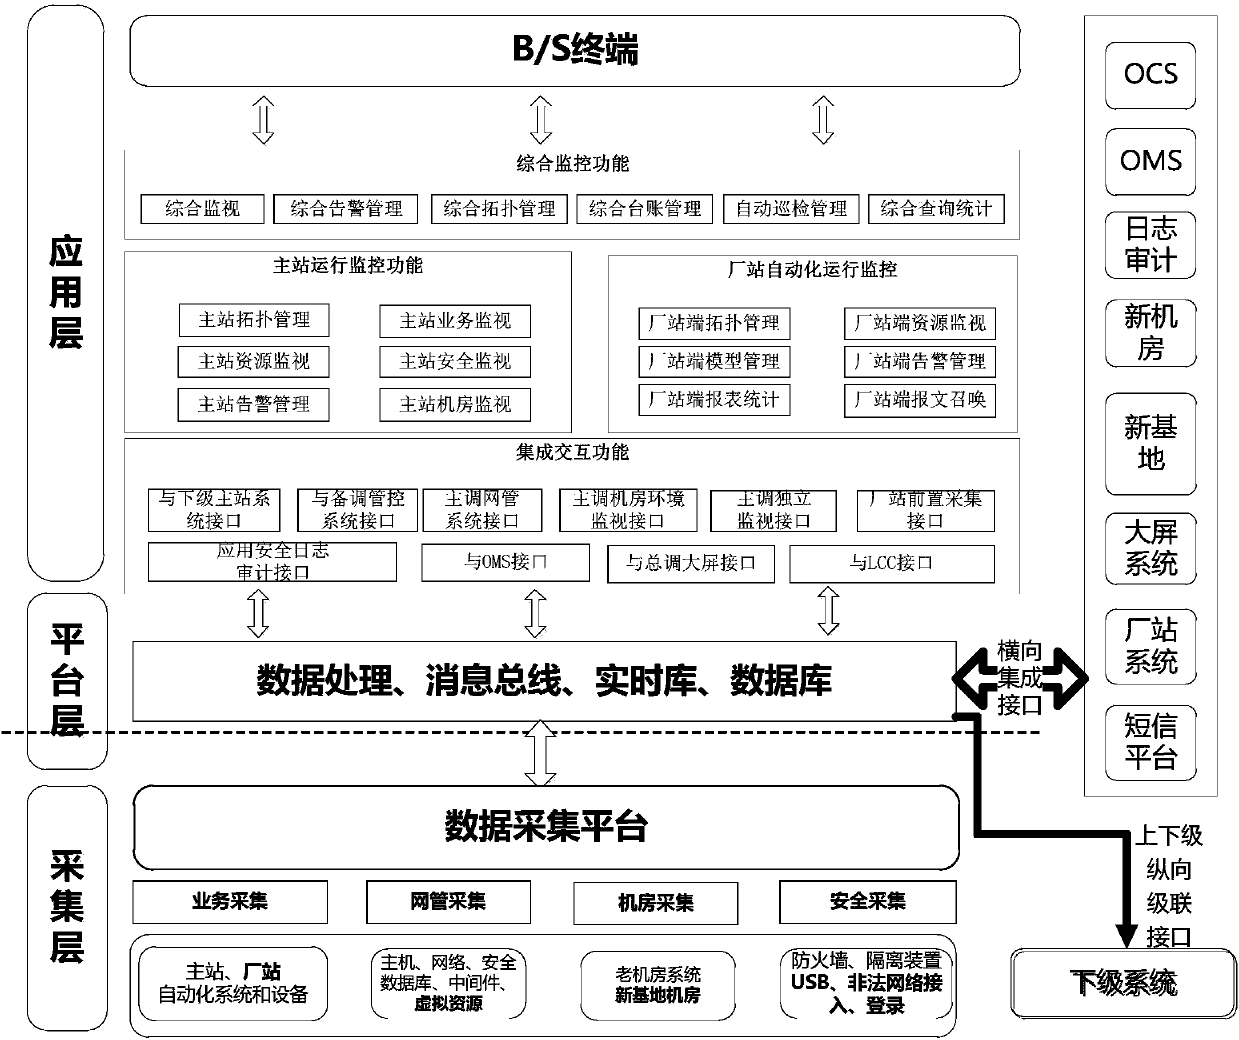 Master station and plant station-integrated power grid dispatching automatic operation comprehensive supervision method